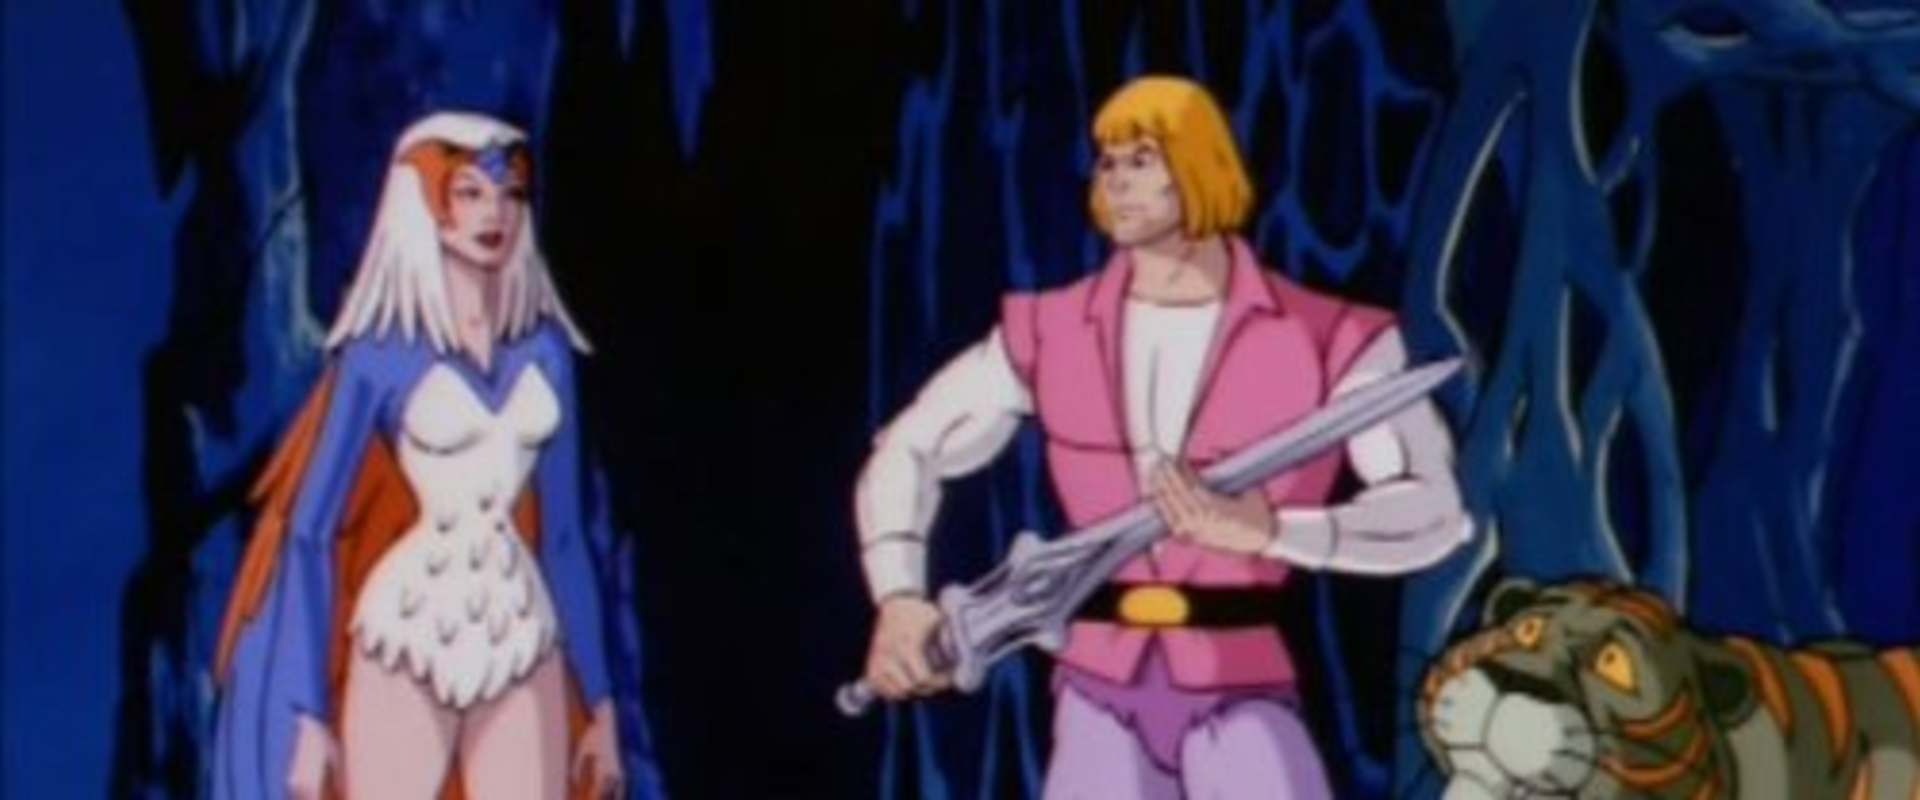 He-Man and She-Ra: The Secret of the Sword background 1